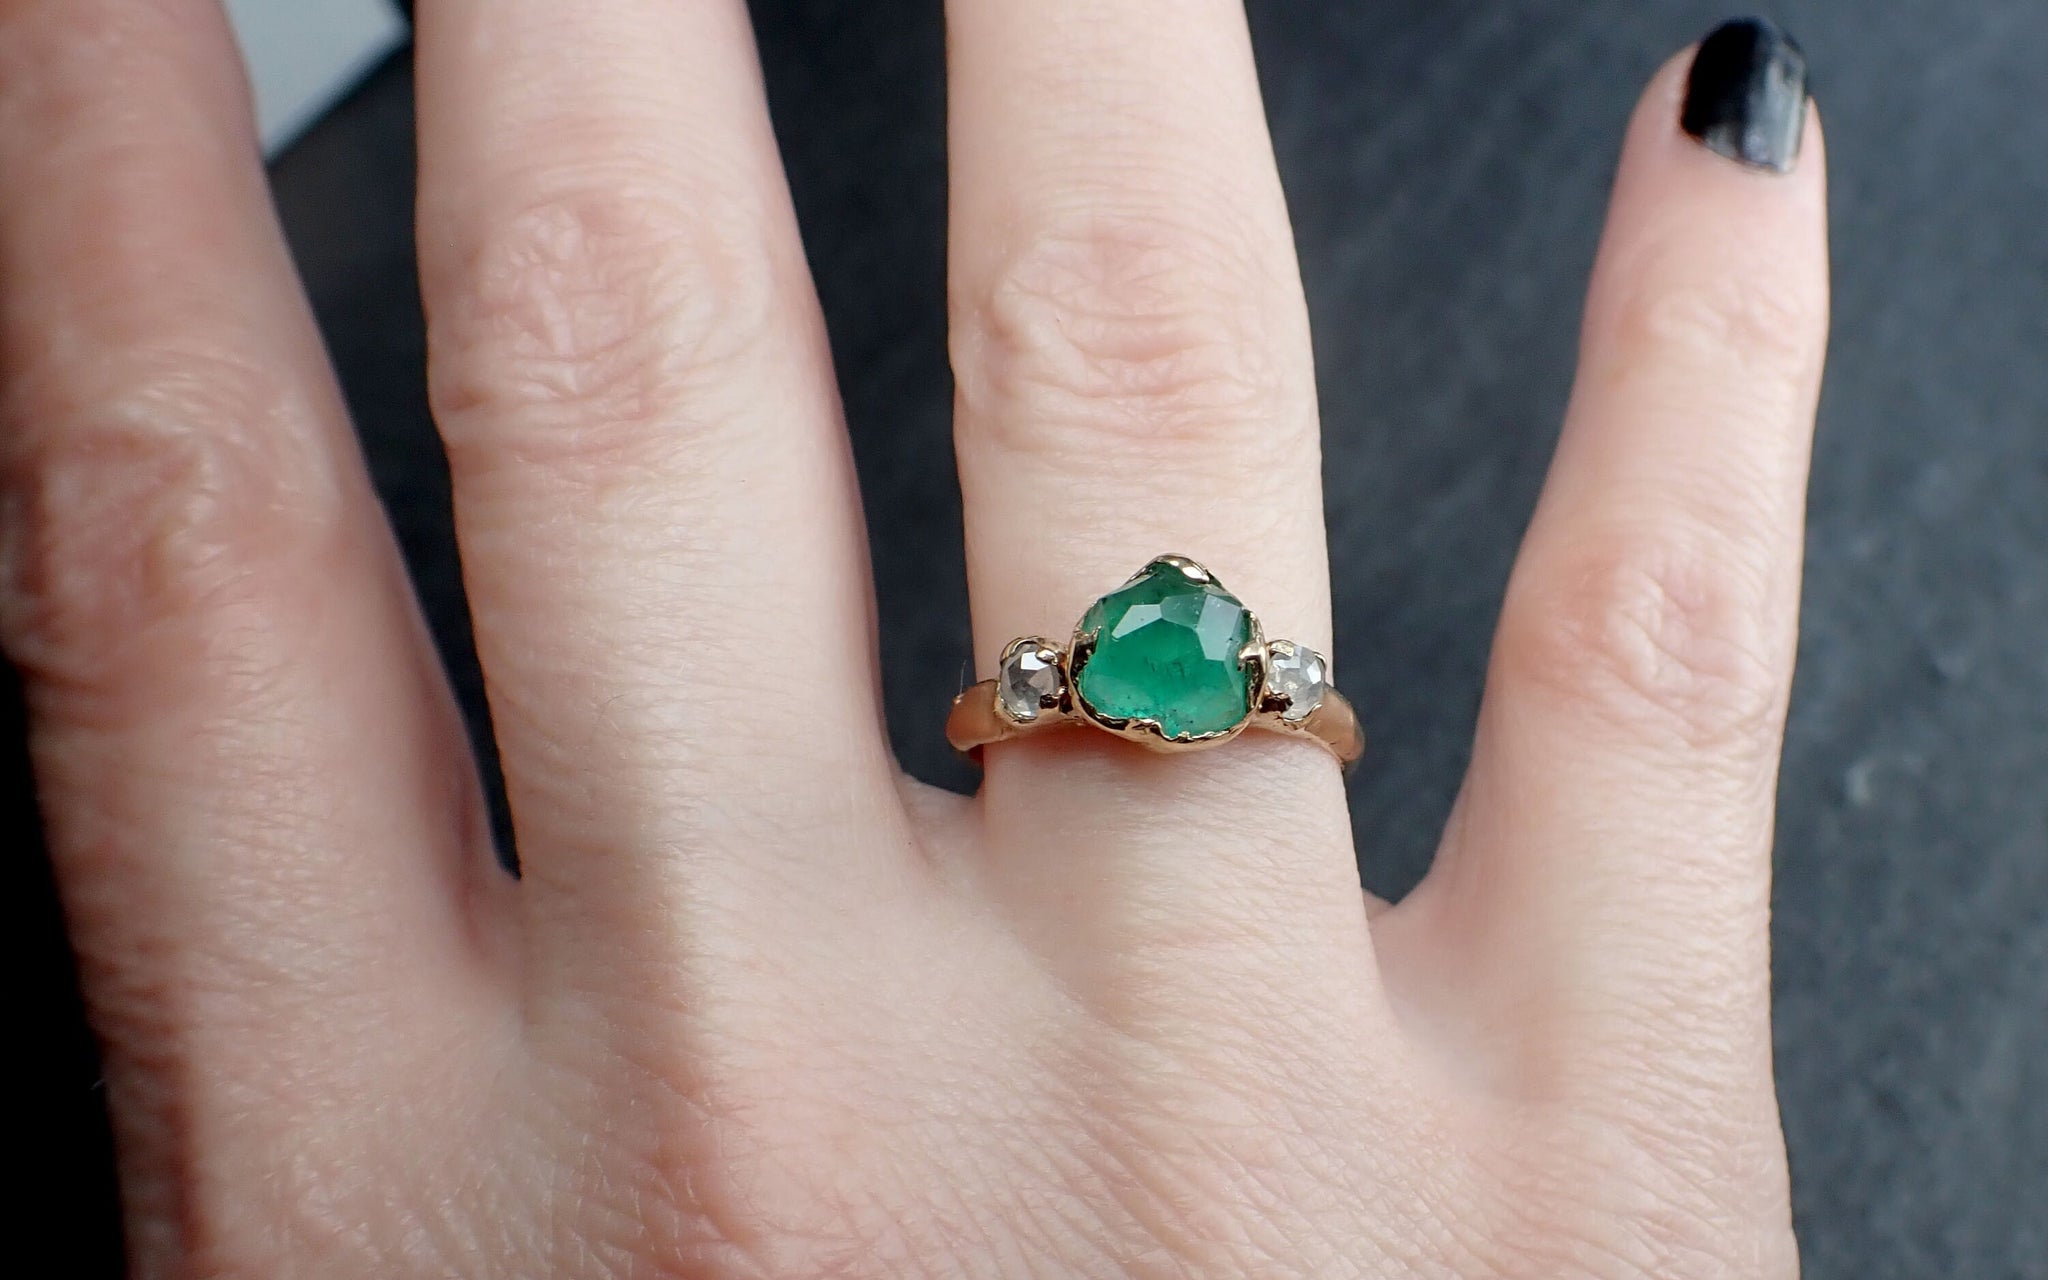 Partially faceted Three Stone Emerald rough diamond Engagement Ring 14k gold Multi stone Wedding Birthstone Ring byAngeline 3241